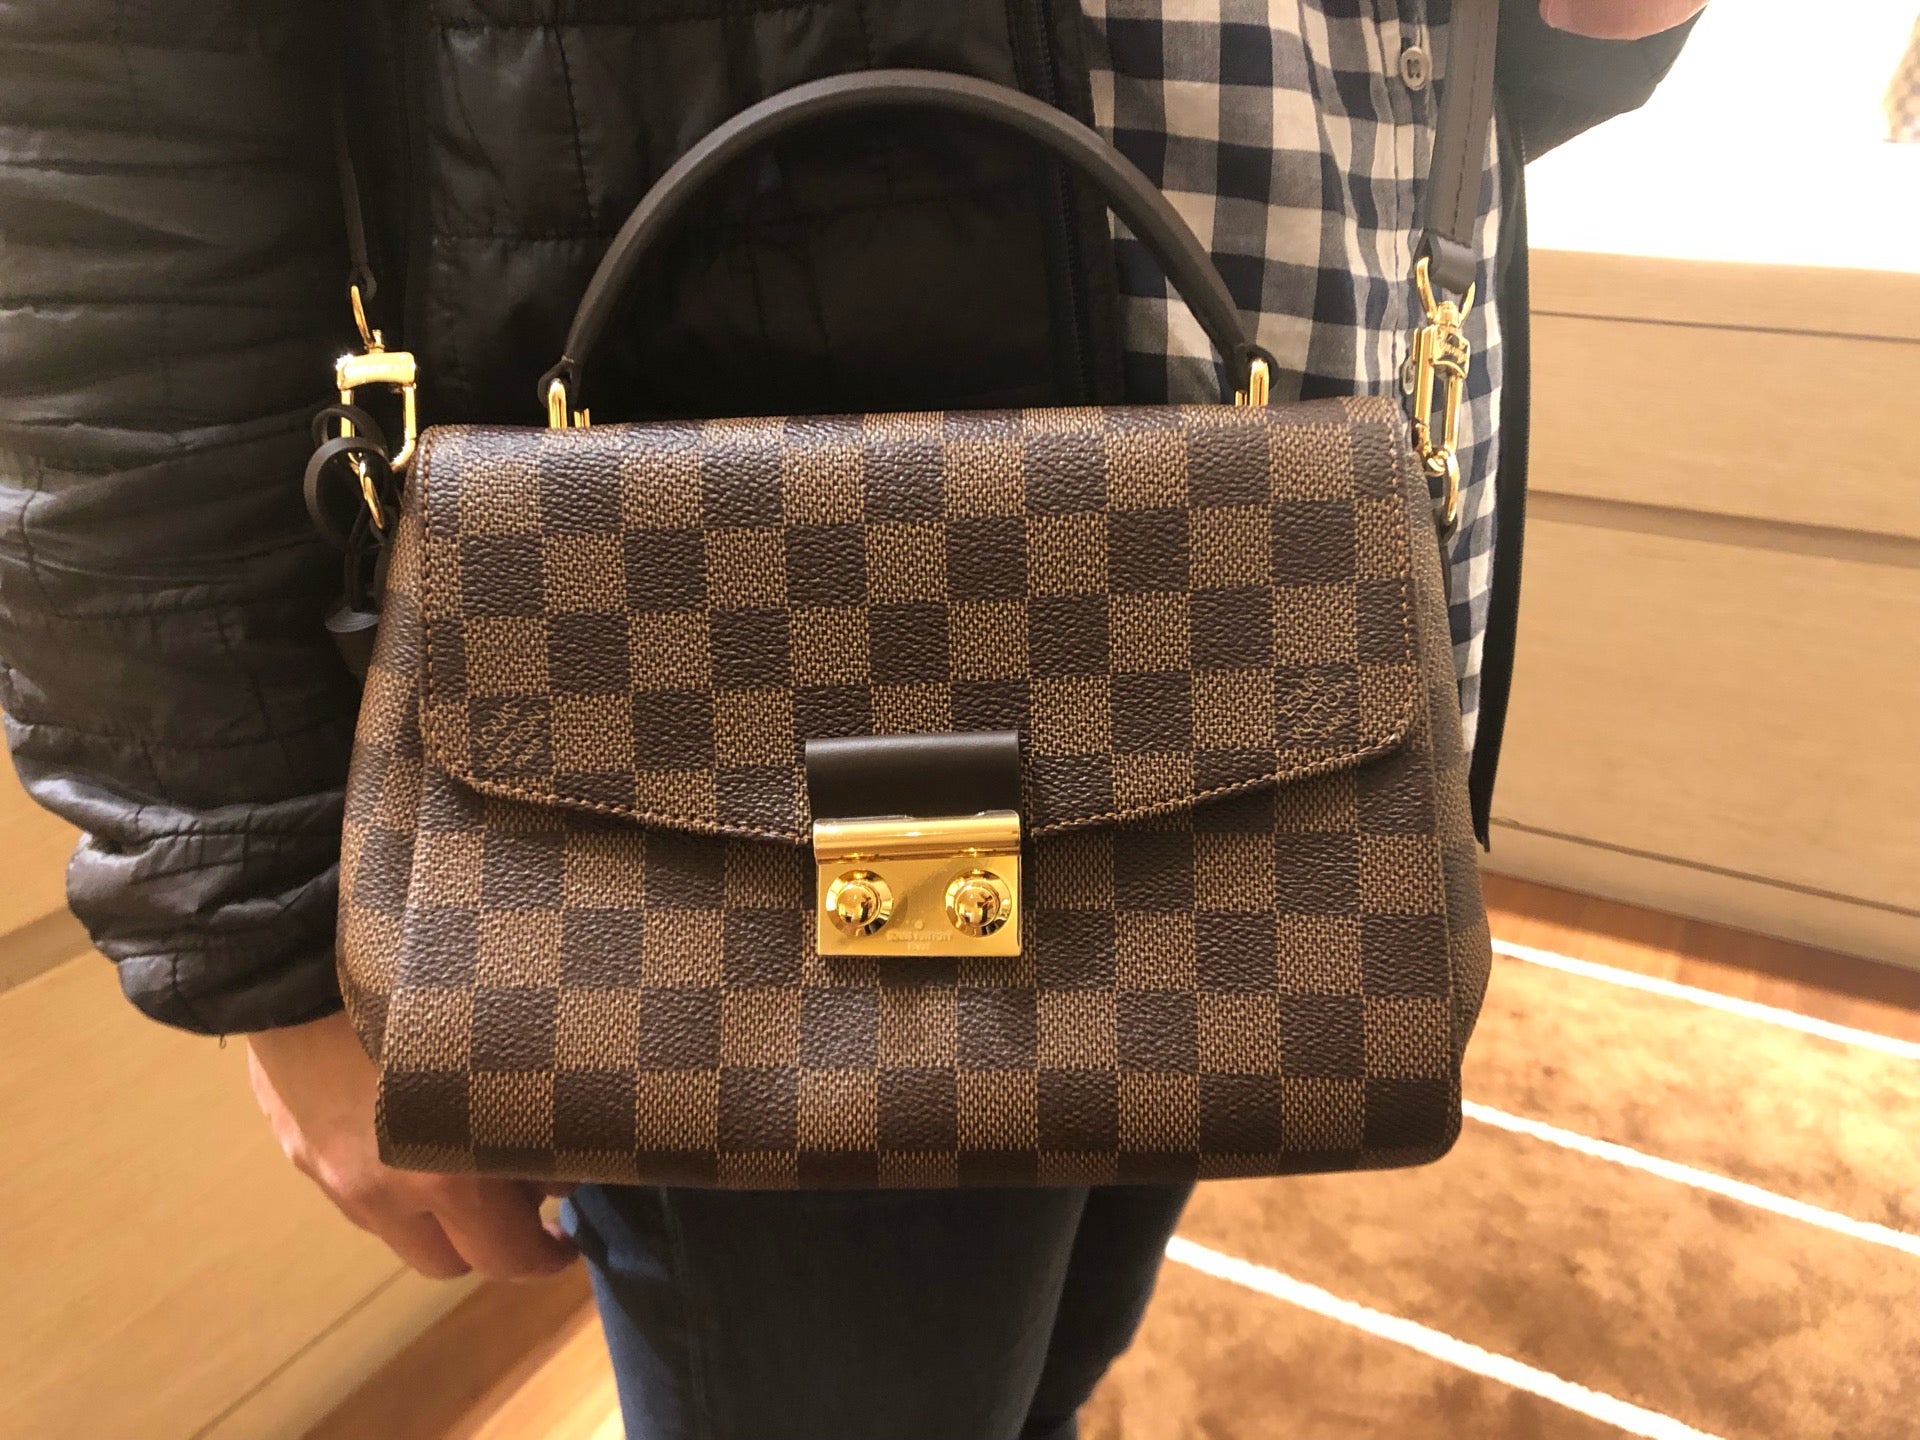 Louis Vuitton Portland, 700 S.W. 5th Avenue, #2060, Pioneer Place, Level 1,  Portland, OR, Beauty Salons-Equipment & Supplies - MapQuest